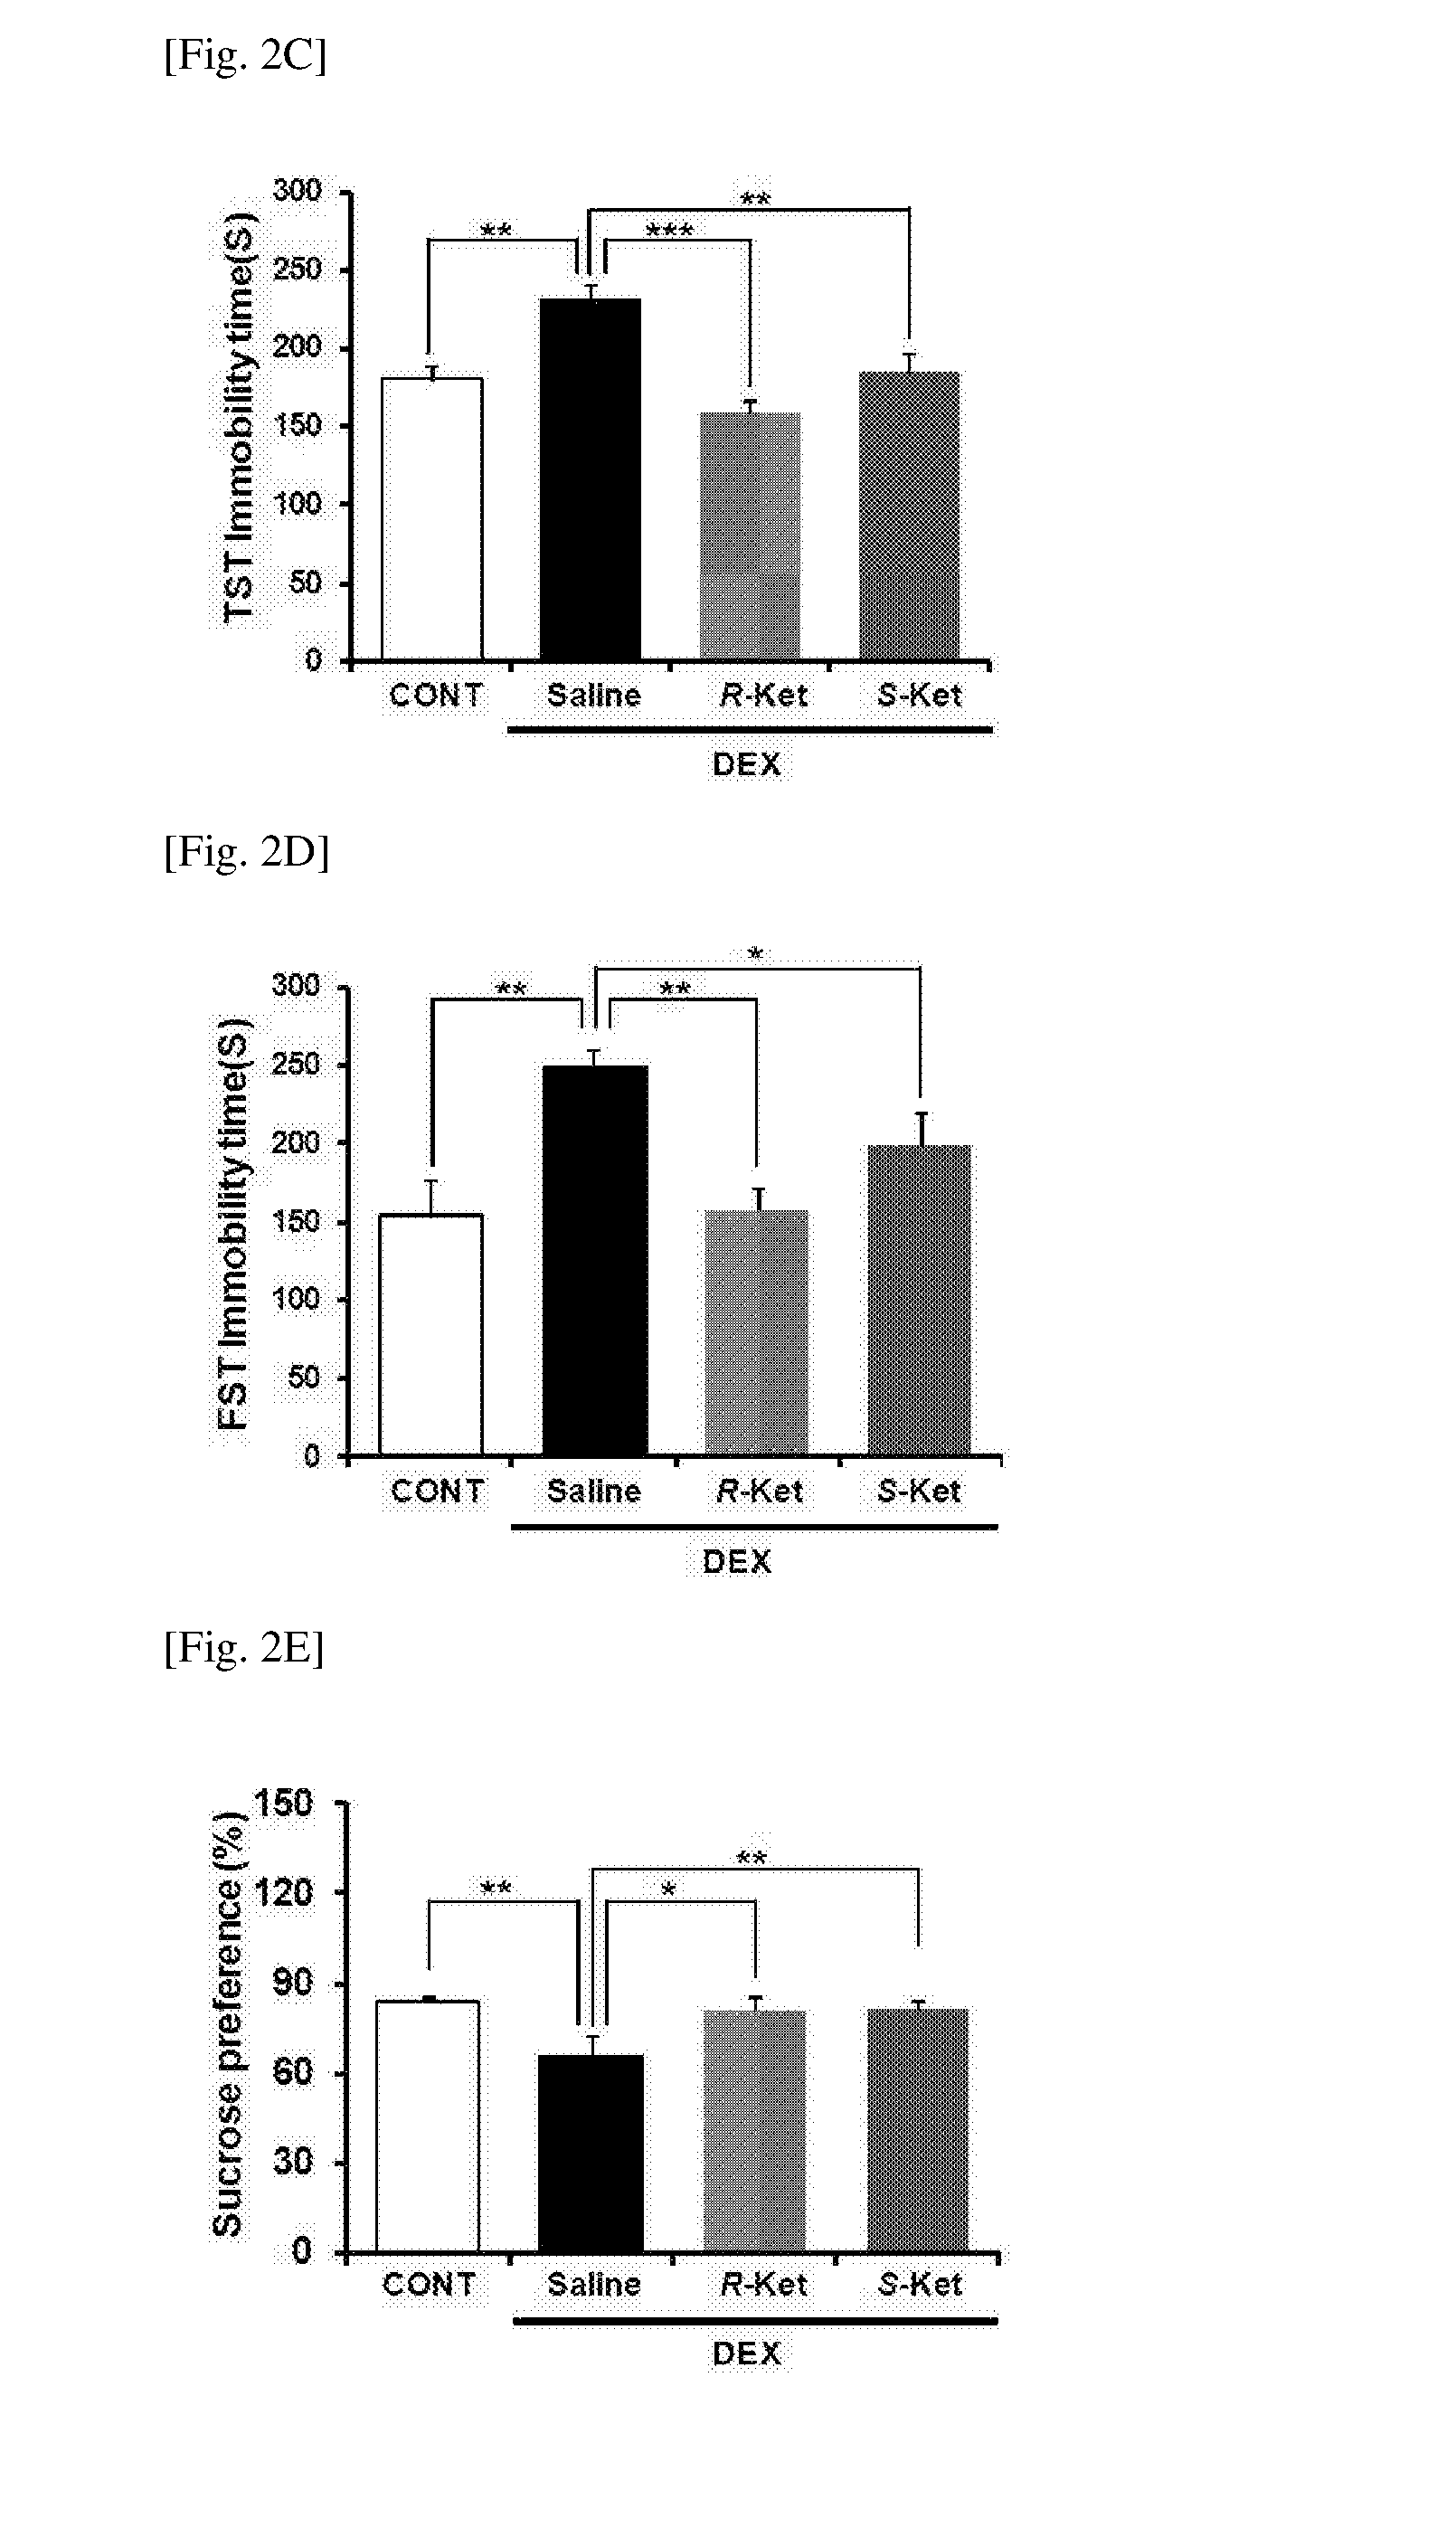 Application Of R-ketamine And Salt Thereof As Pharmaceuticals